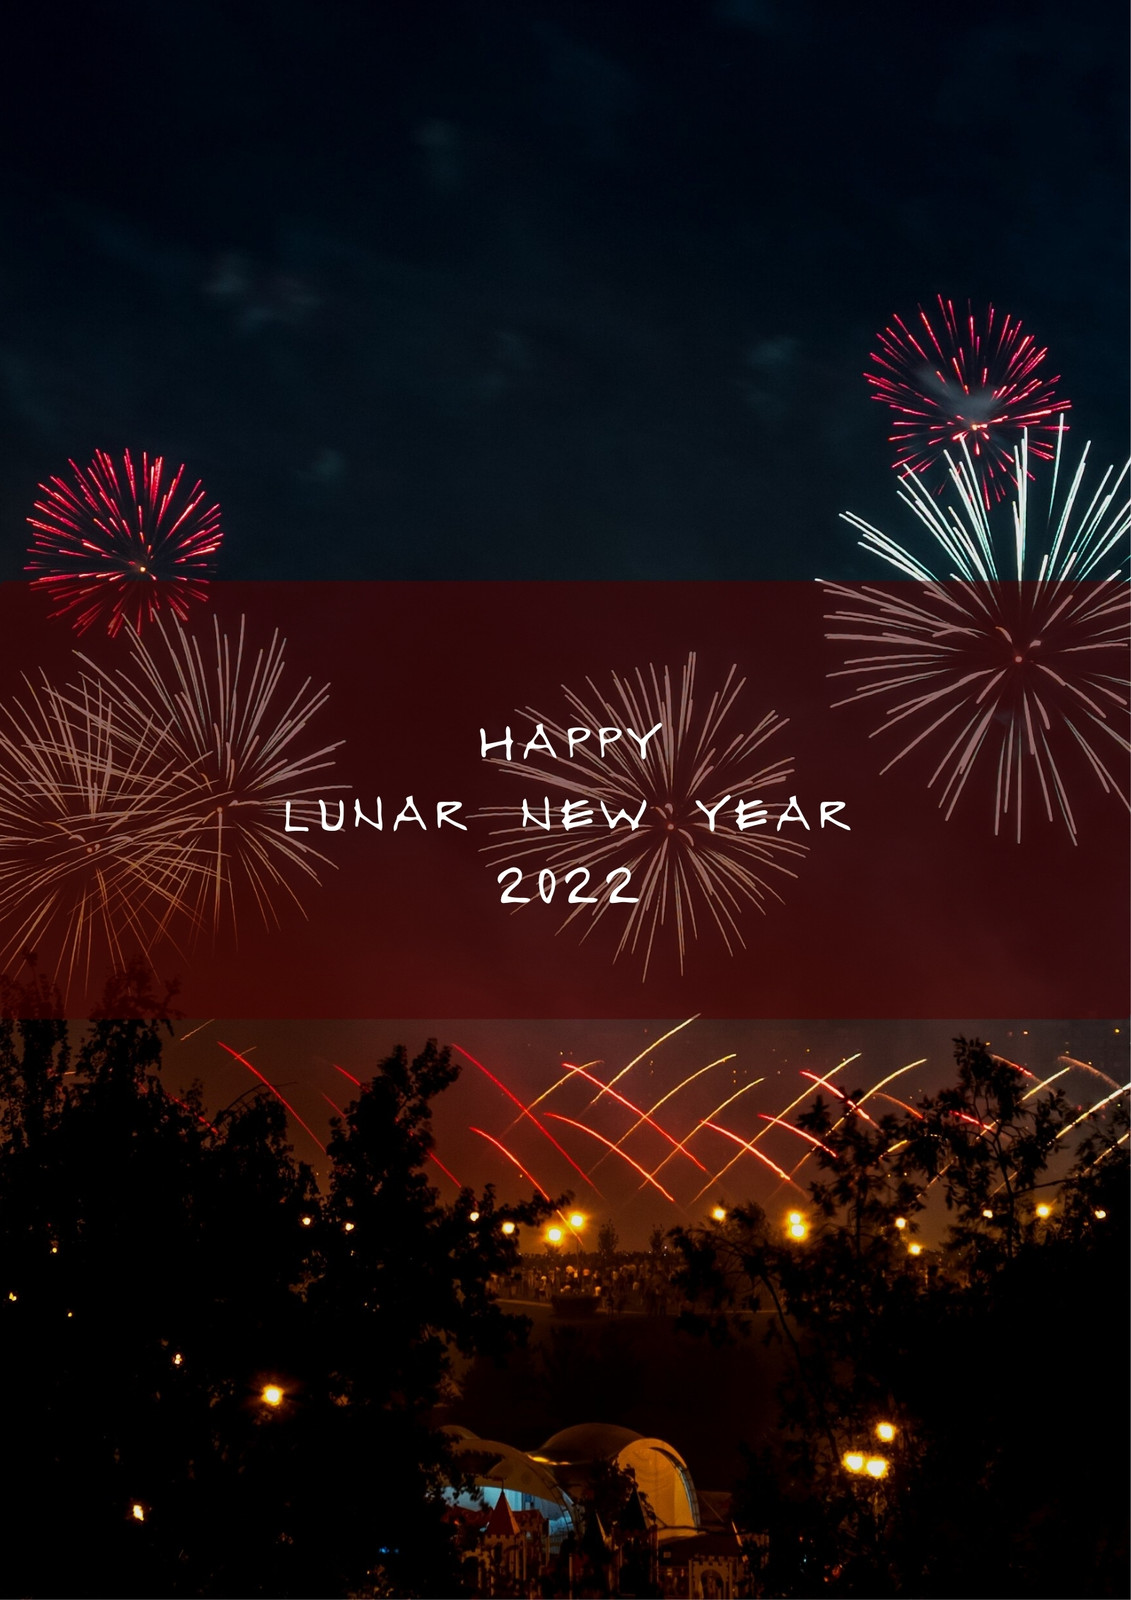 Page 11 - Free Lunar New Year posters to customize and print | Canva